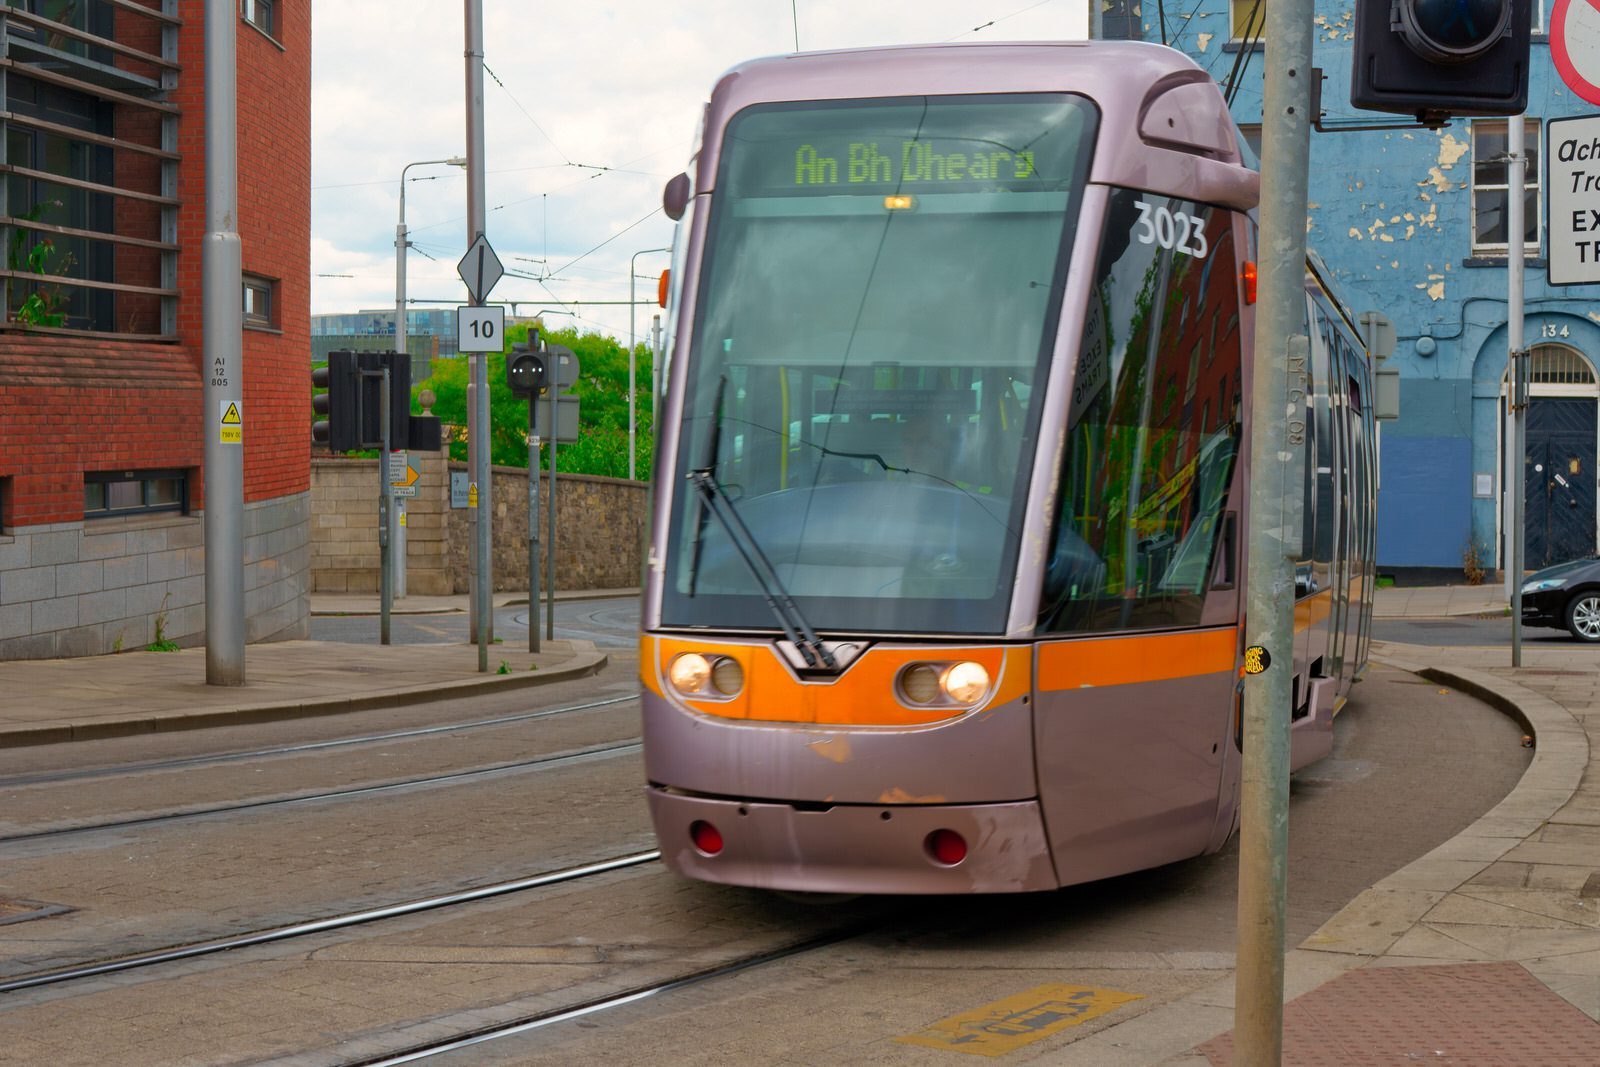 WHY WOULD ANYONE PHOTOGRAPH A TRAM COMING UP A HILL - A PASSERBY ACTUALLY ASKED ME [MAYBE THE BARD HAS AN ANSWER] 002